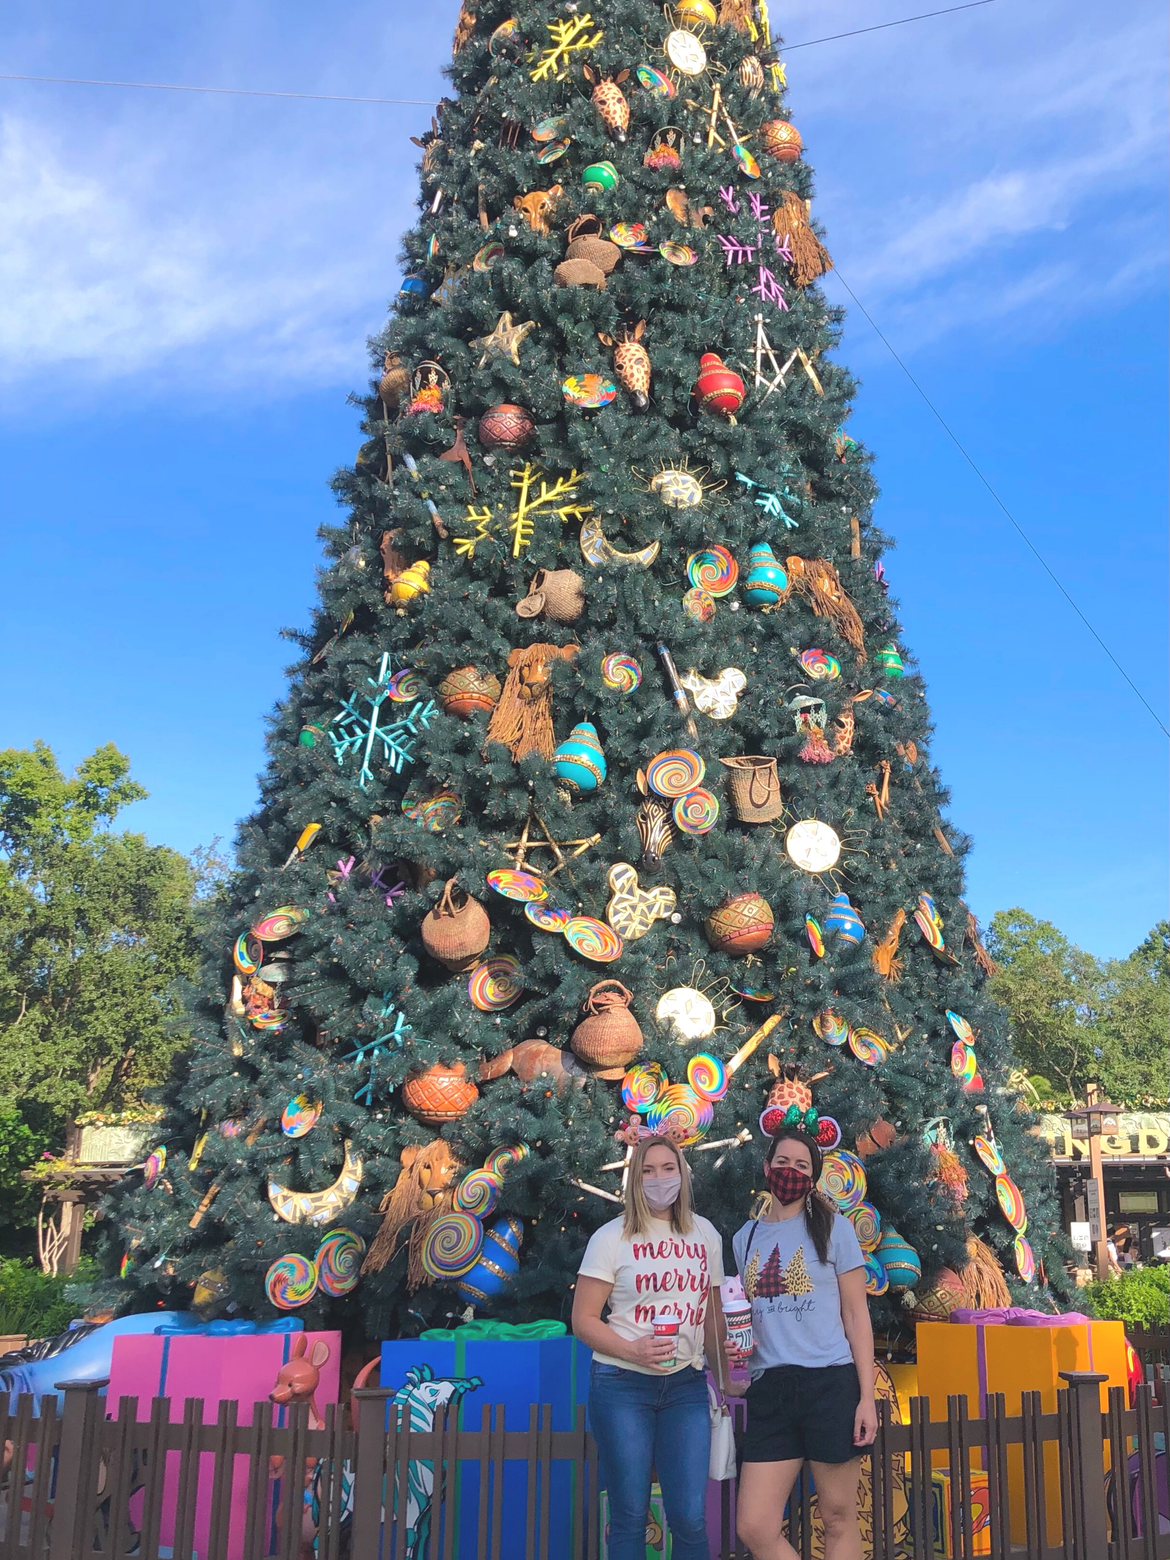 Author, Kelly Nelson (left), and Jenn C. Harmon (right) wear holiday inspired shirts and Minnie Mouse Ears within front of the Christmas Tree at Disney's Animal Kingdom Theme Park at Walt Disney World® Resort.